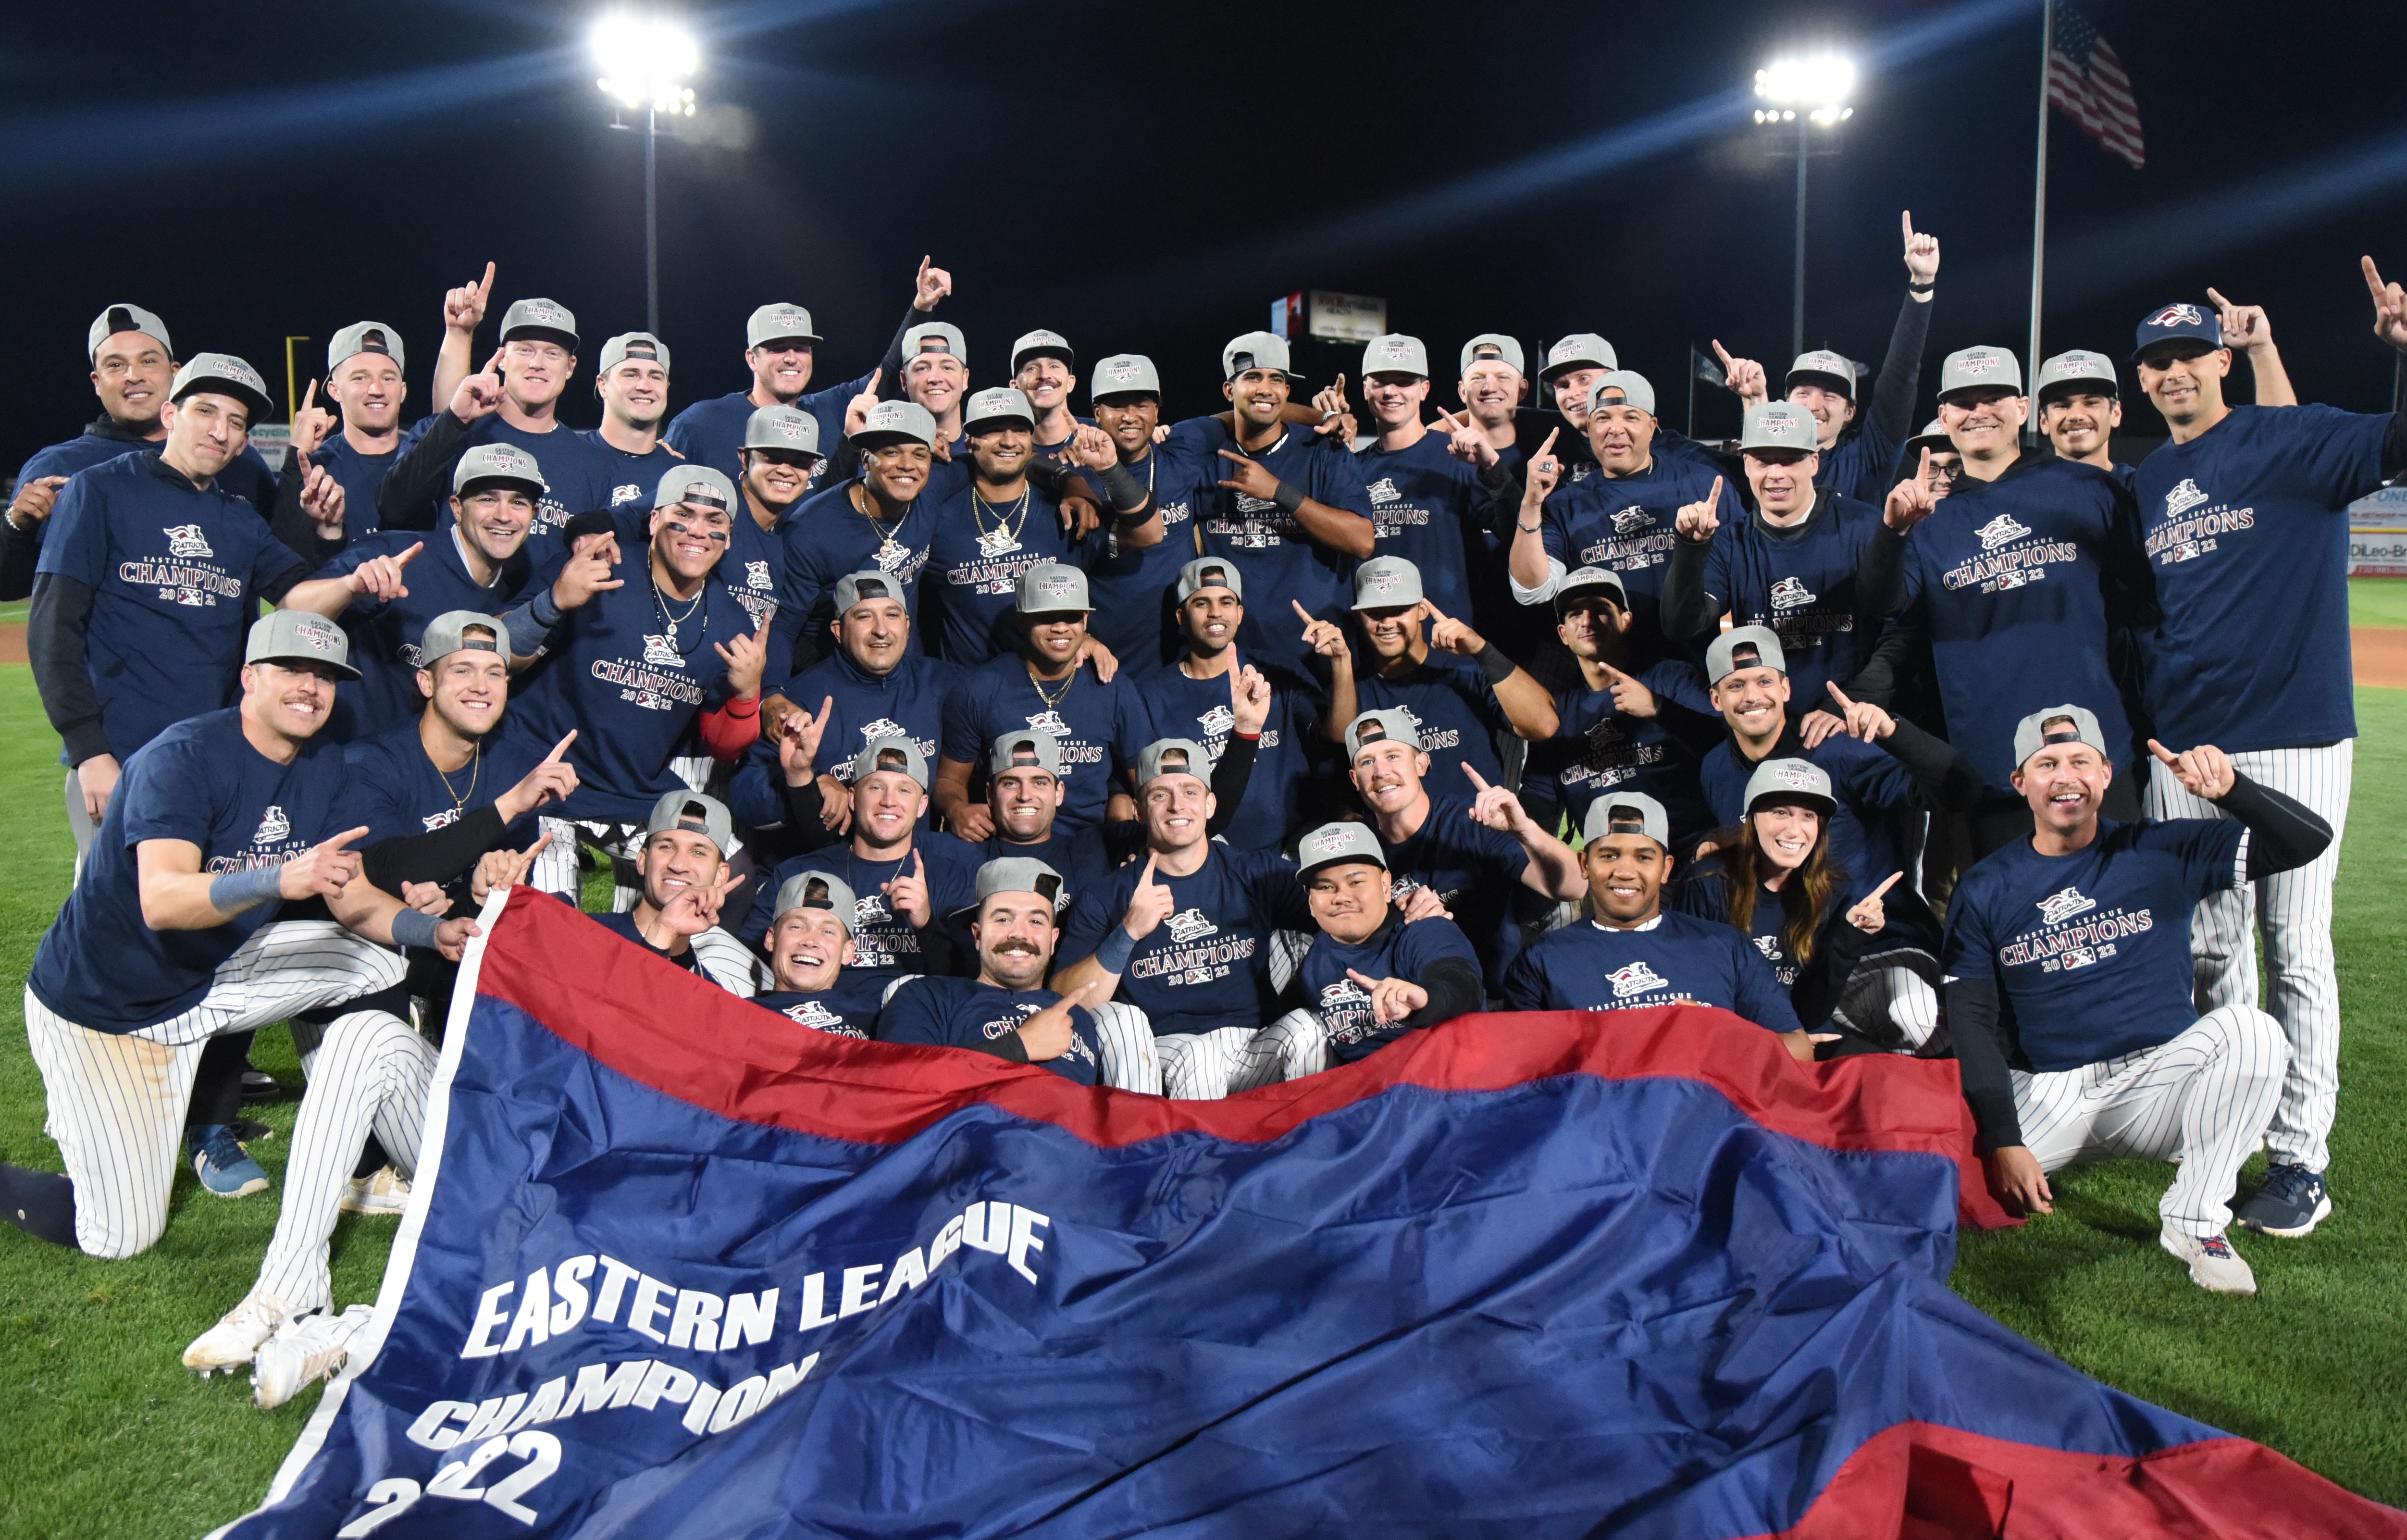 Somerset Patriots on X: Come out to our game on 7/27 to meet